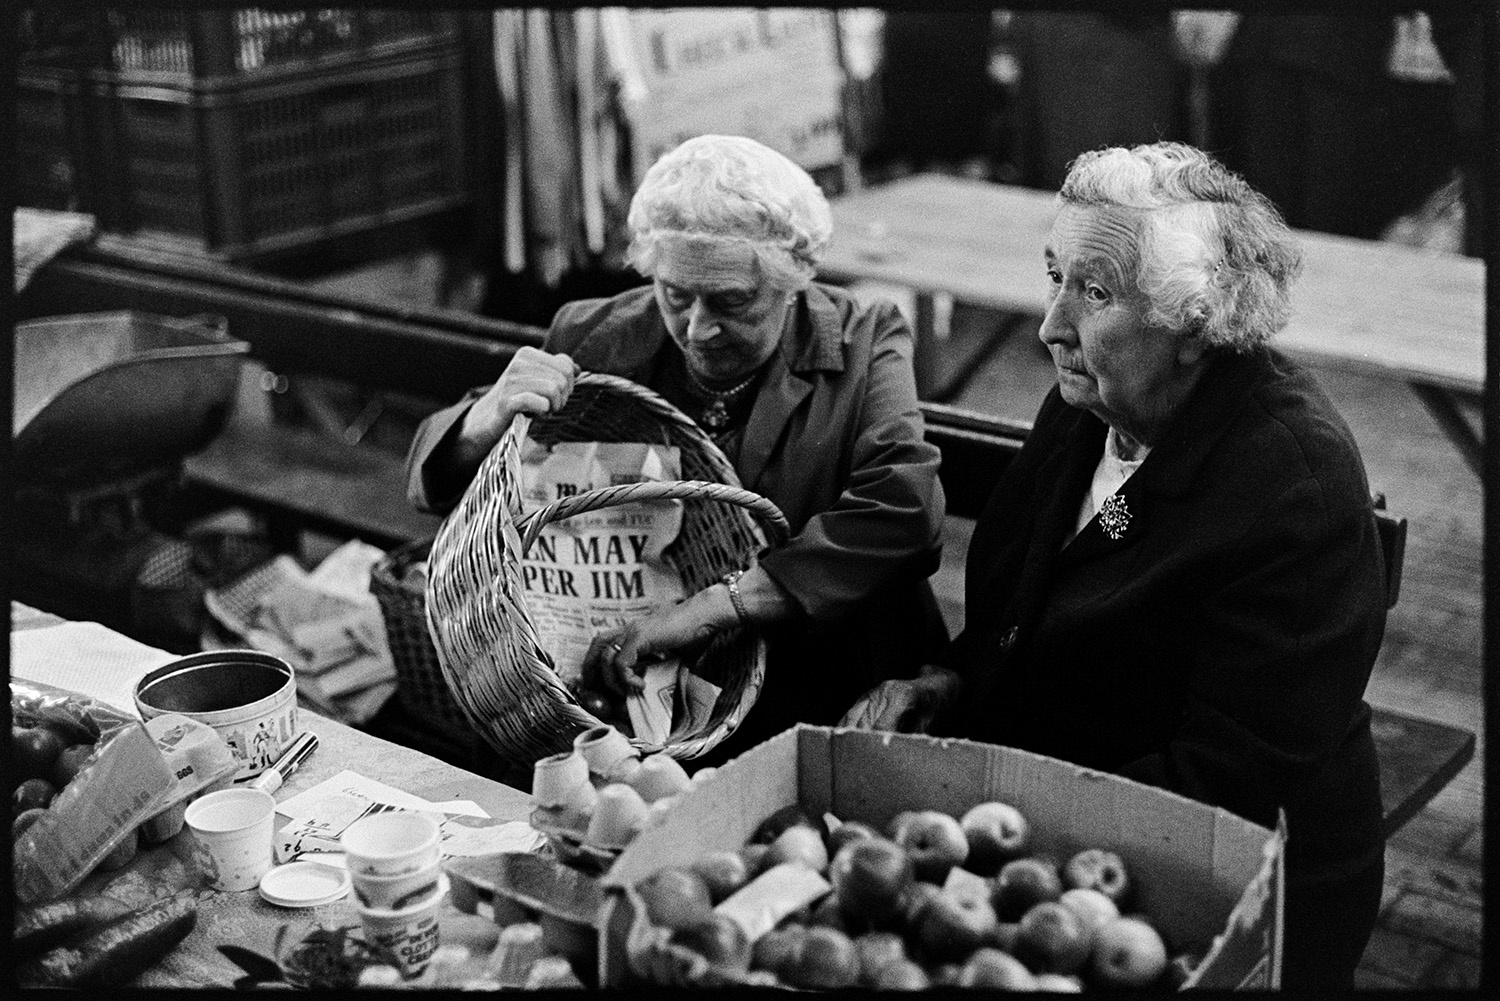 Stalls at Pannier Market, food, clothes. 
[Two women sat behind a stall at Bideford Pannier Market. One lady is emptying produce from a wicker basket. Eggs and apples are displayed on the stall for sale.]